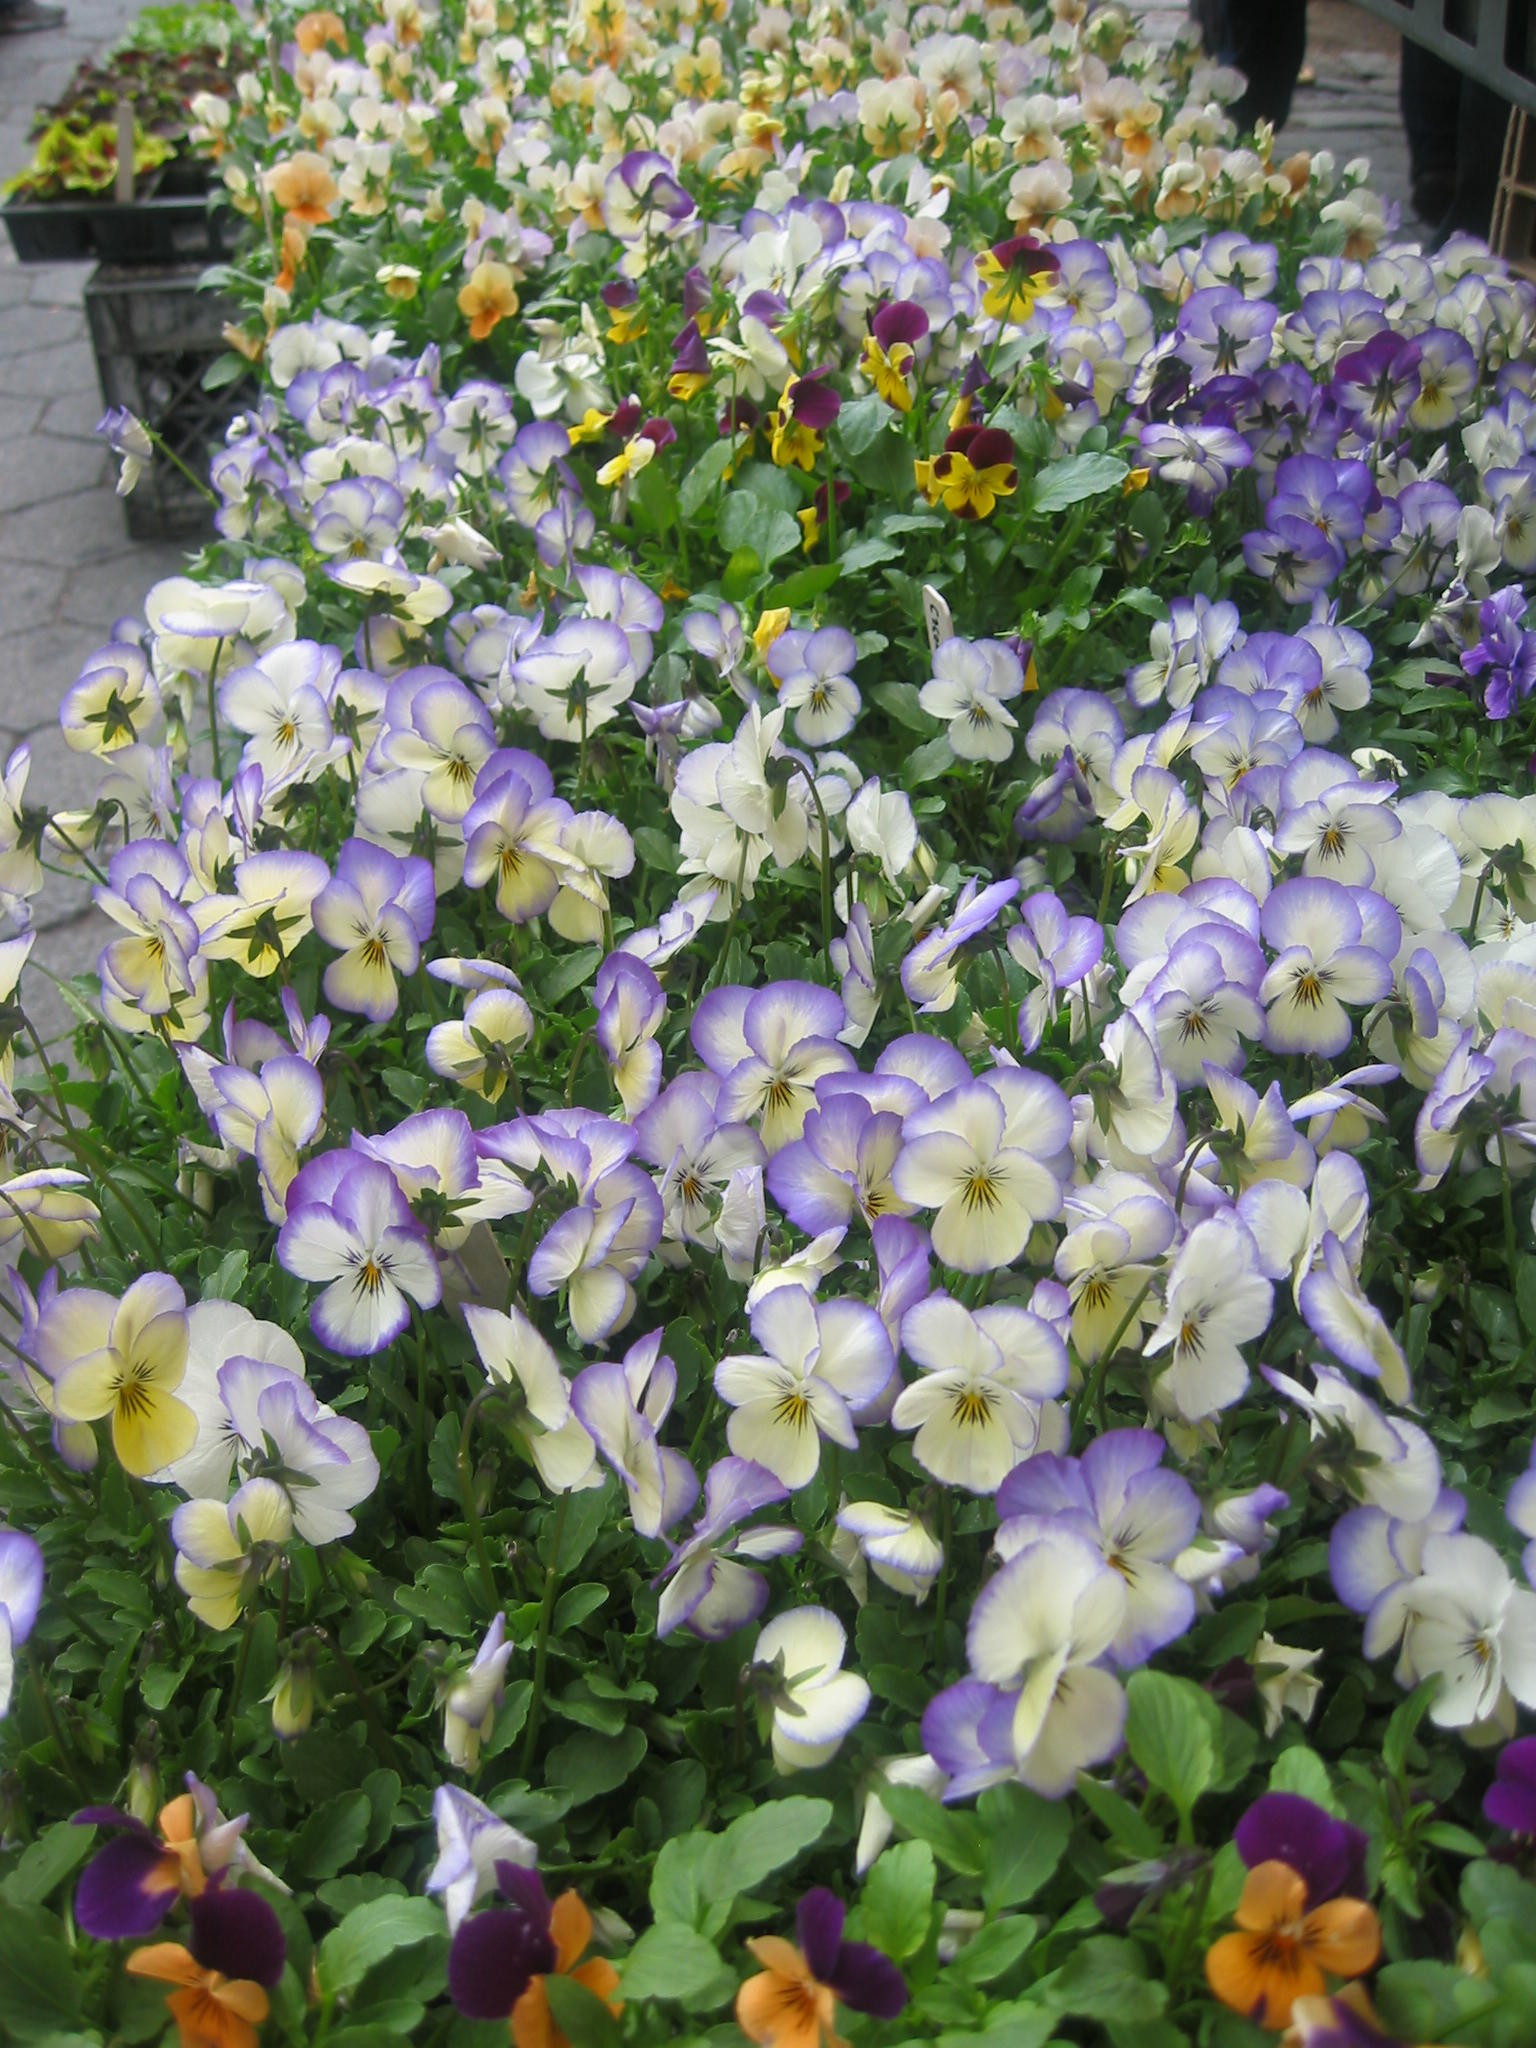 Farmers Market at Tompkins Park - Pansies for Sale